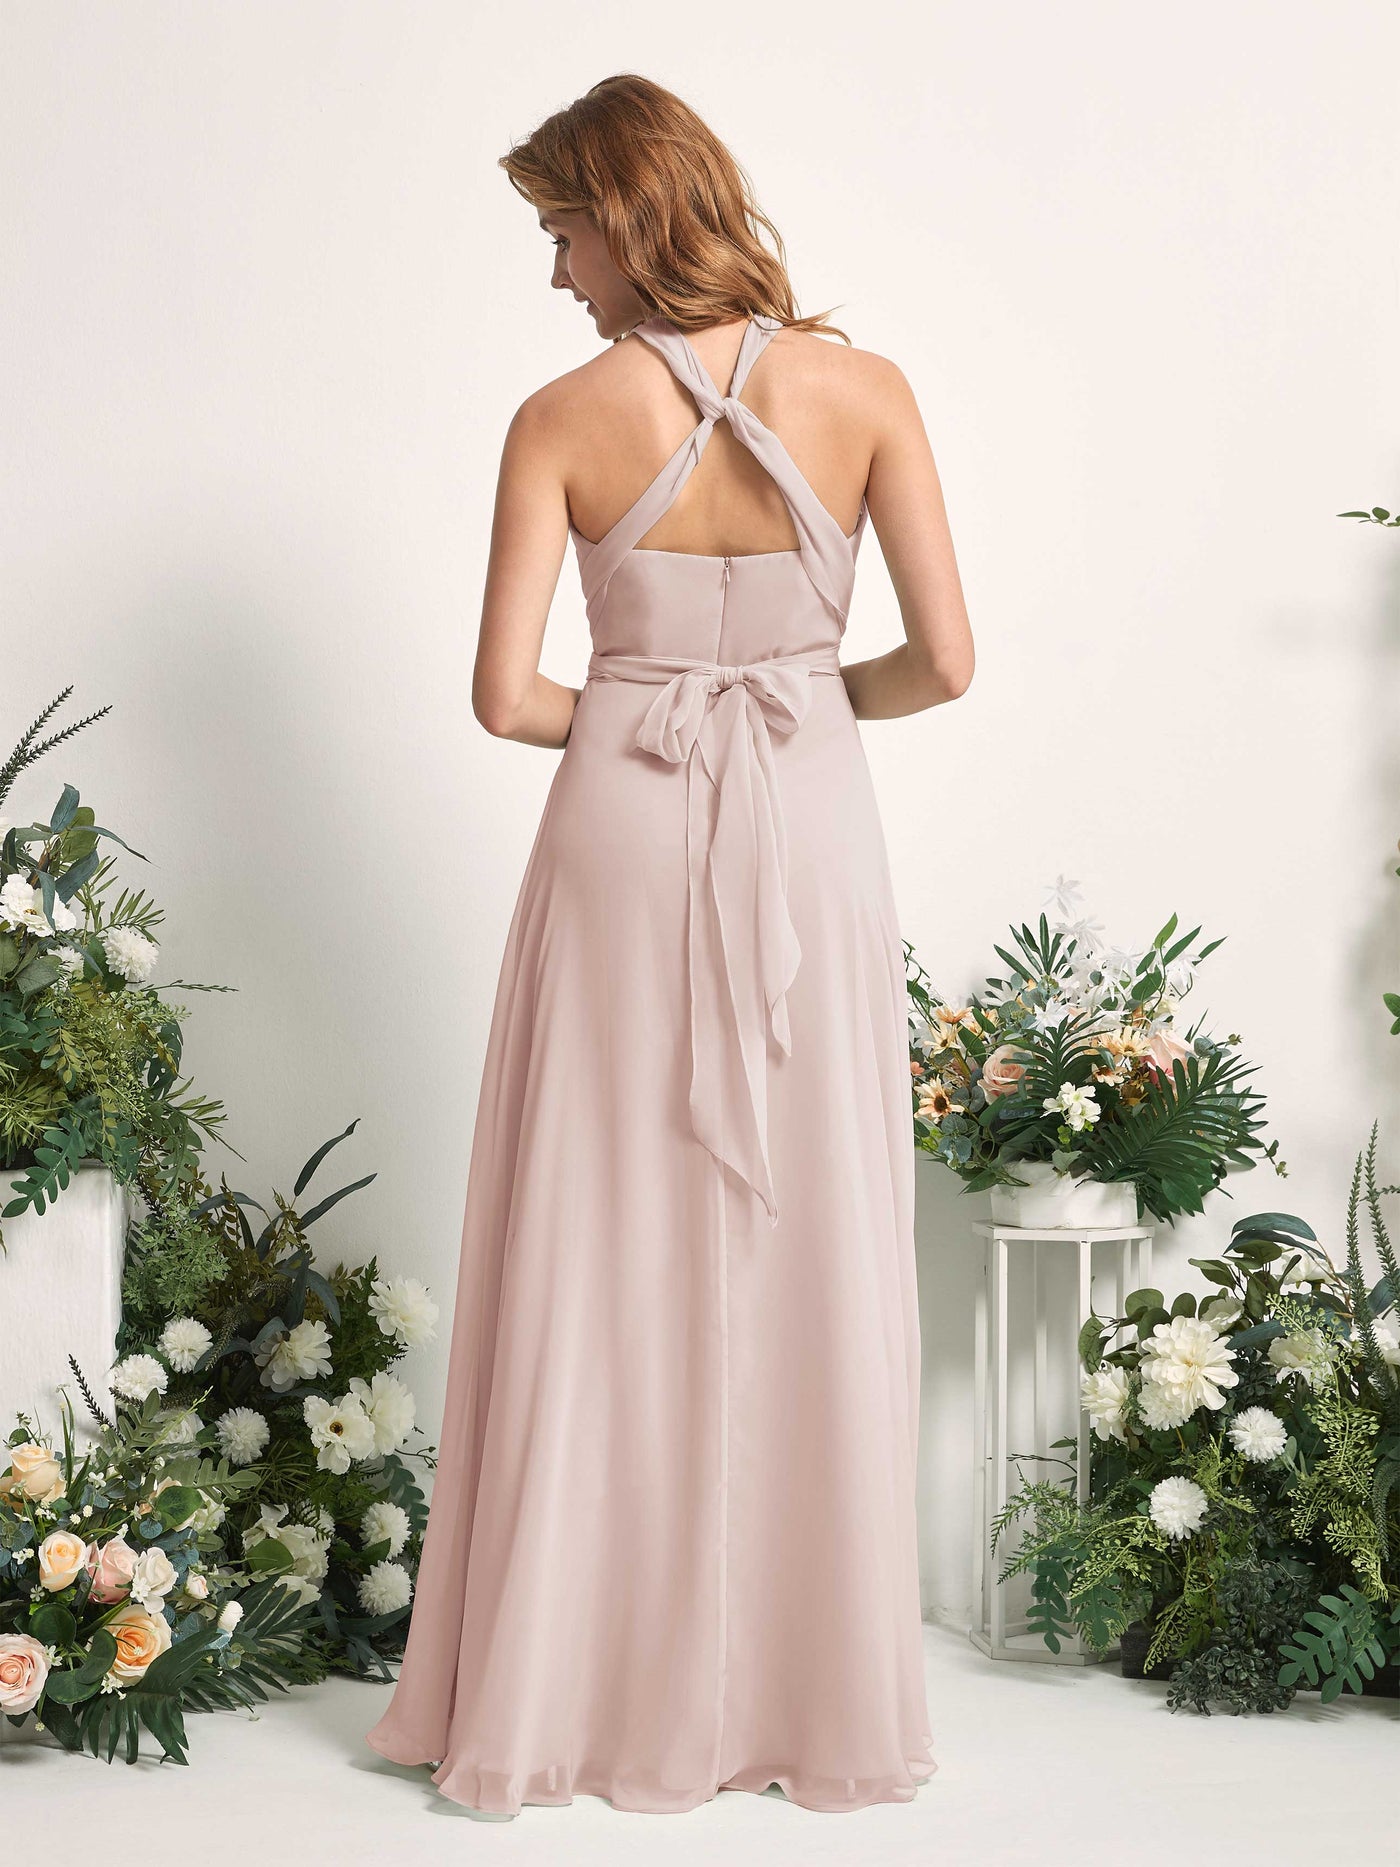 Bridesmaid Dress A-line Chiffon Halter Full Length Short Sleeves Wedding Party Dress - Biscotti (81226335)#color_biscotti